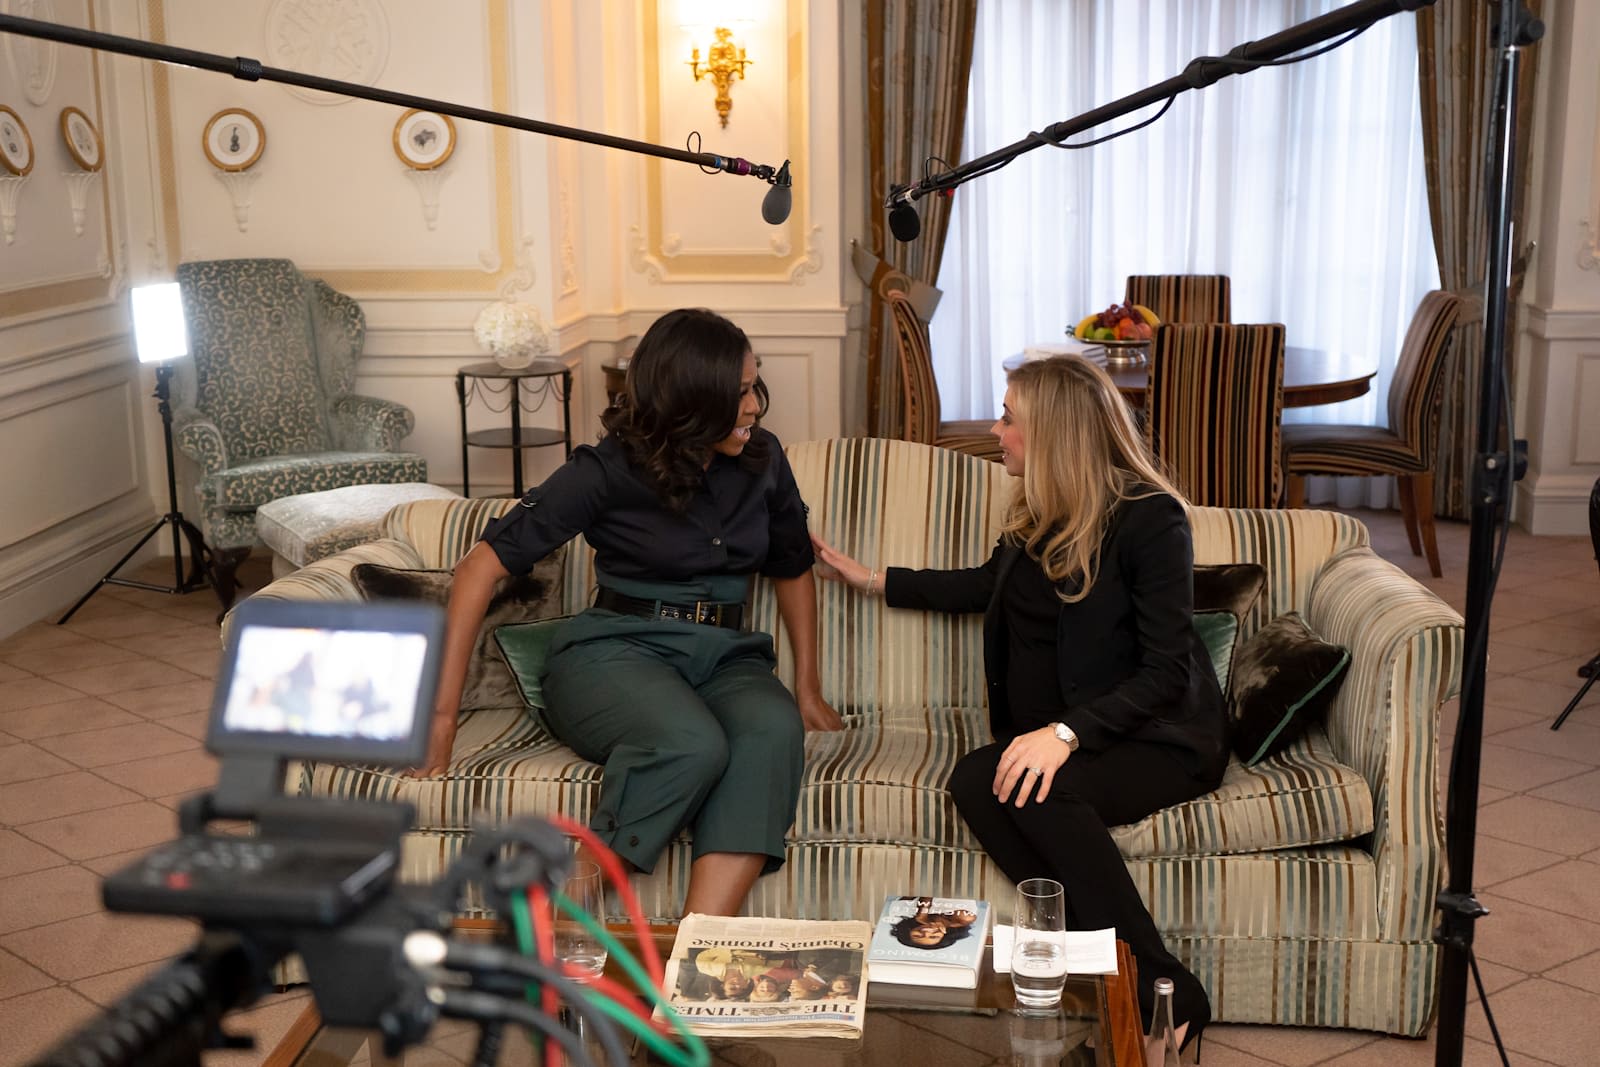 Michelle Obama and Holly Branson sit on a sofa chatting together. Filming equipment is also in shot